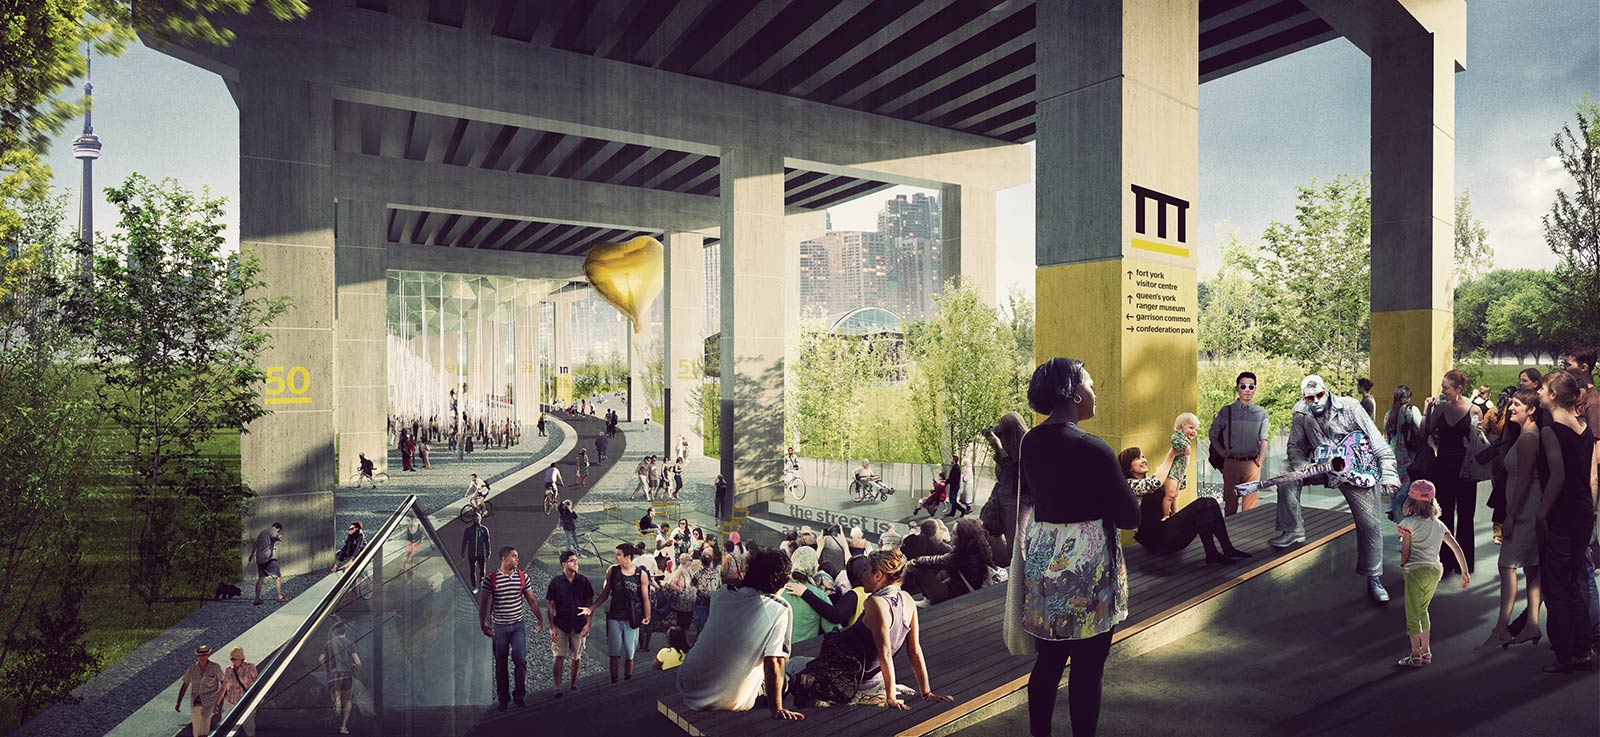 These Parks Are Reclaiming Ugly Urban Underpasses As Public Space